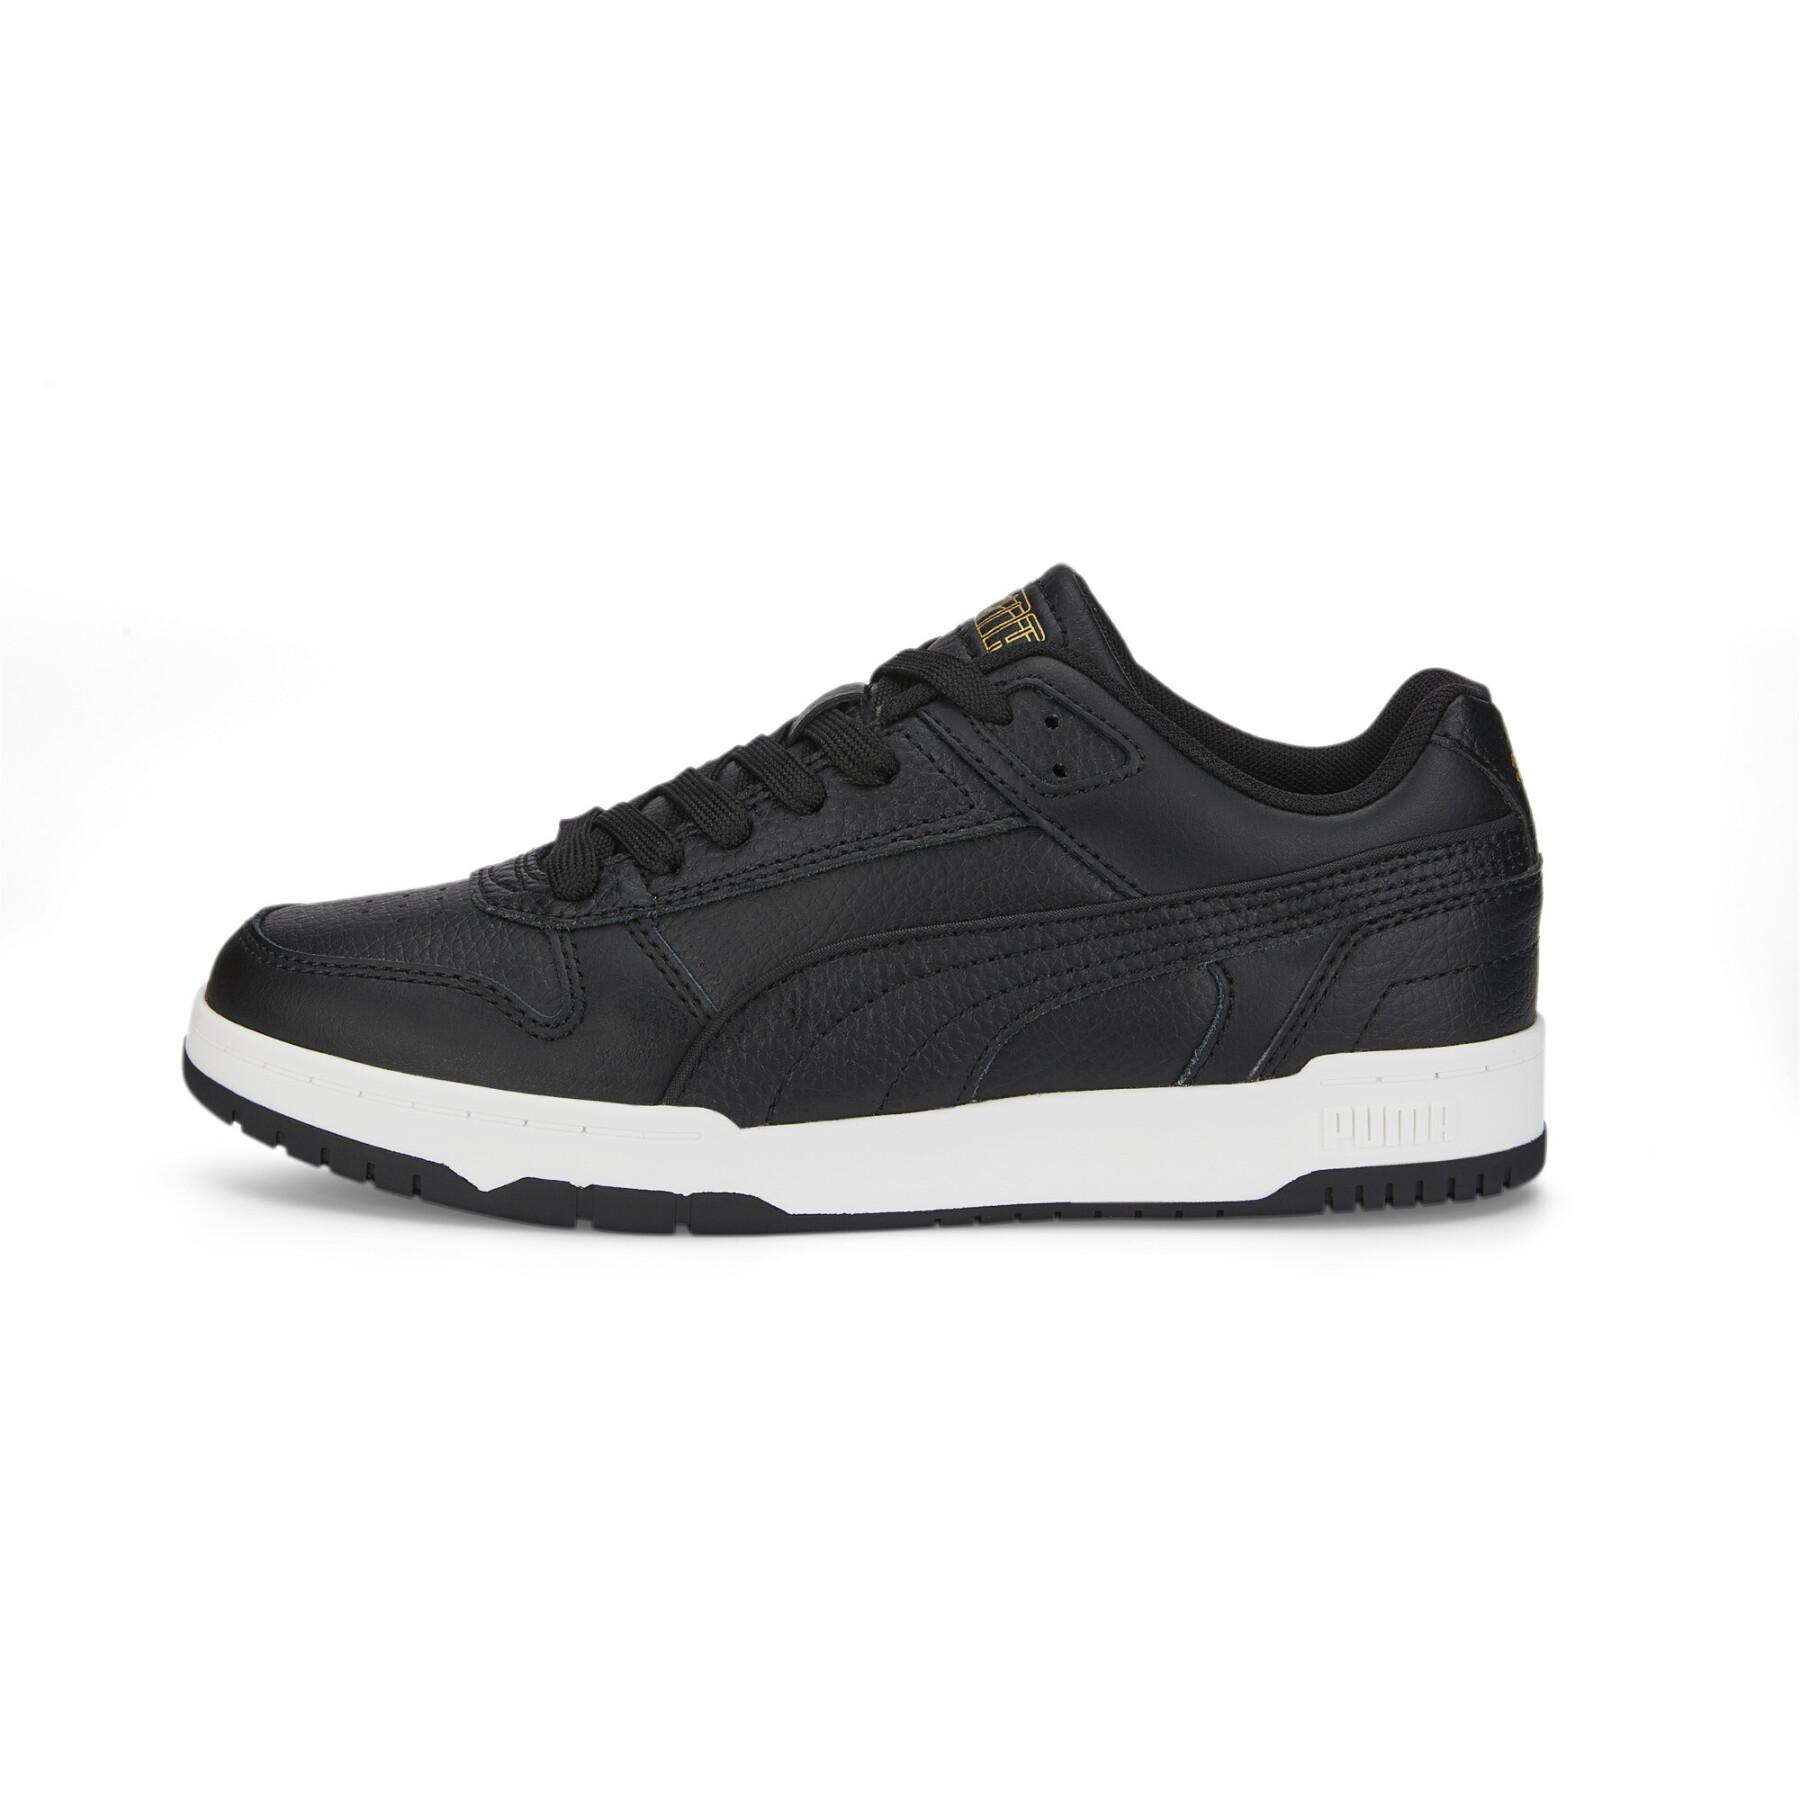 Lifestyle - child Game Brands Rbd low Puma - - Sneakers Puma